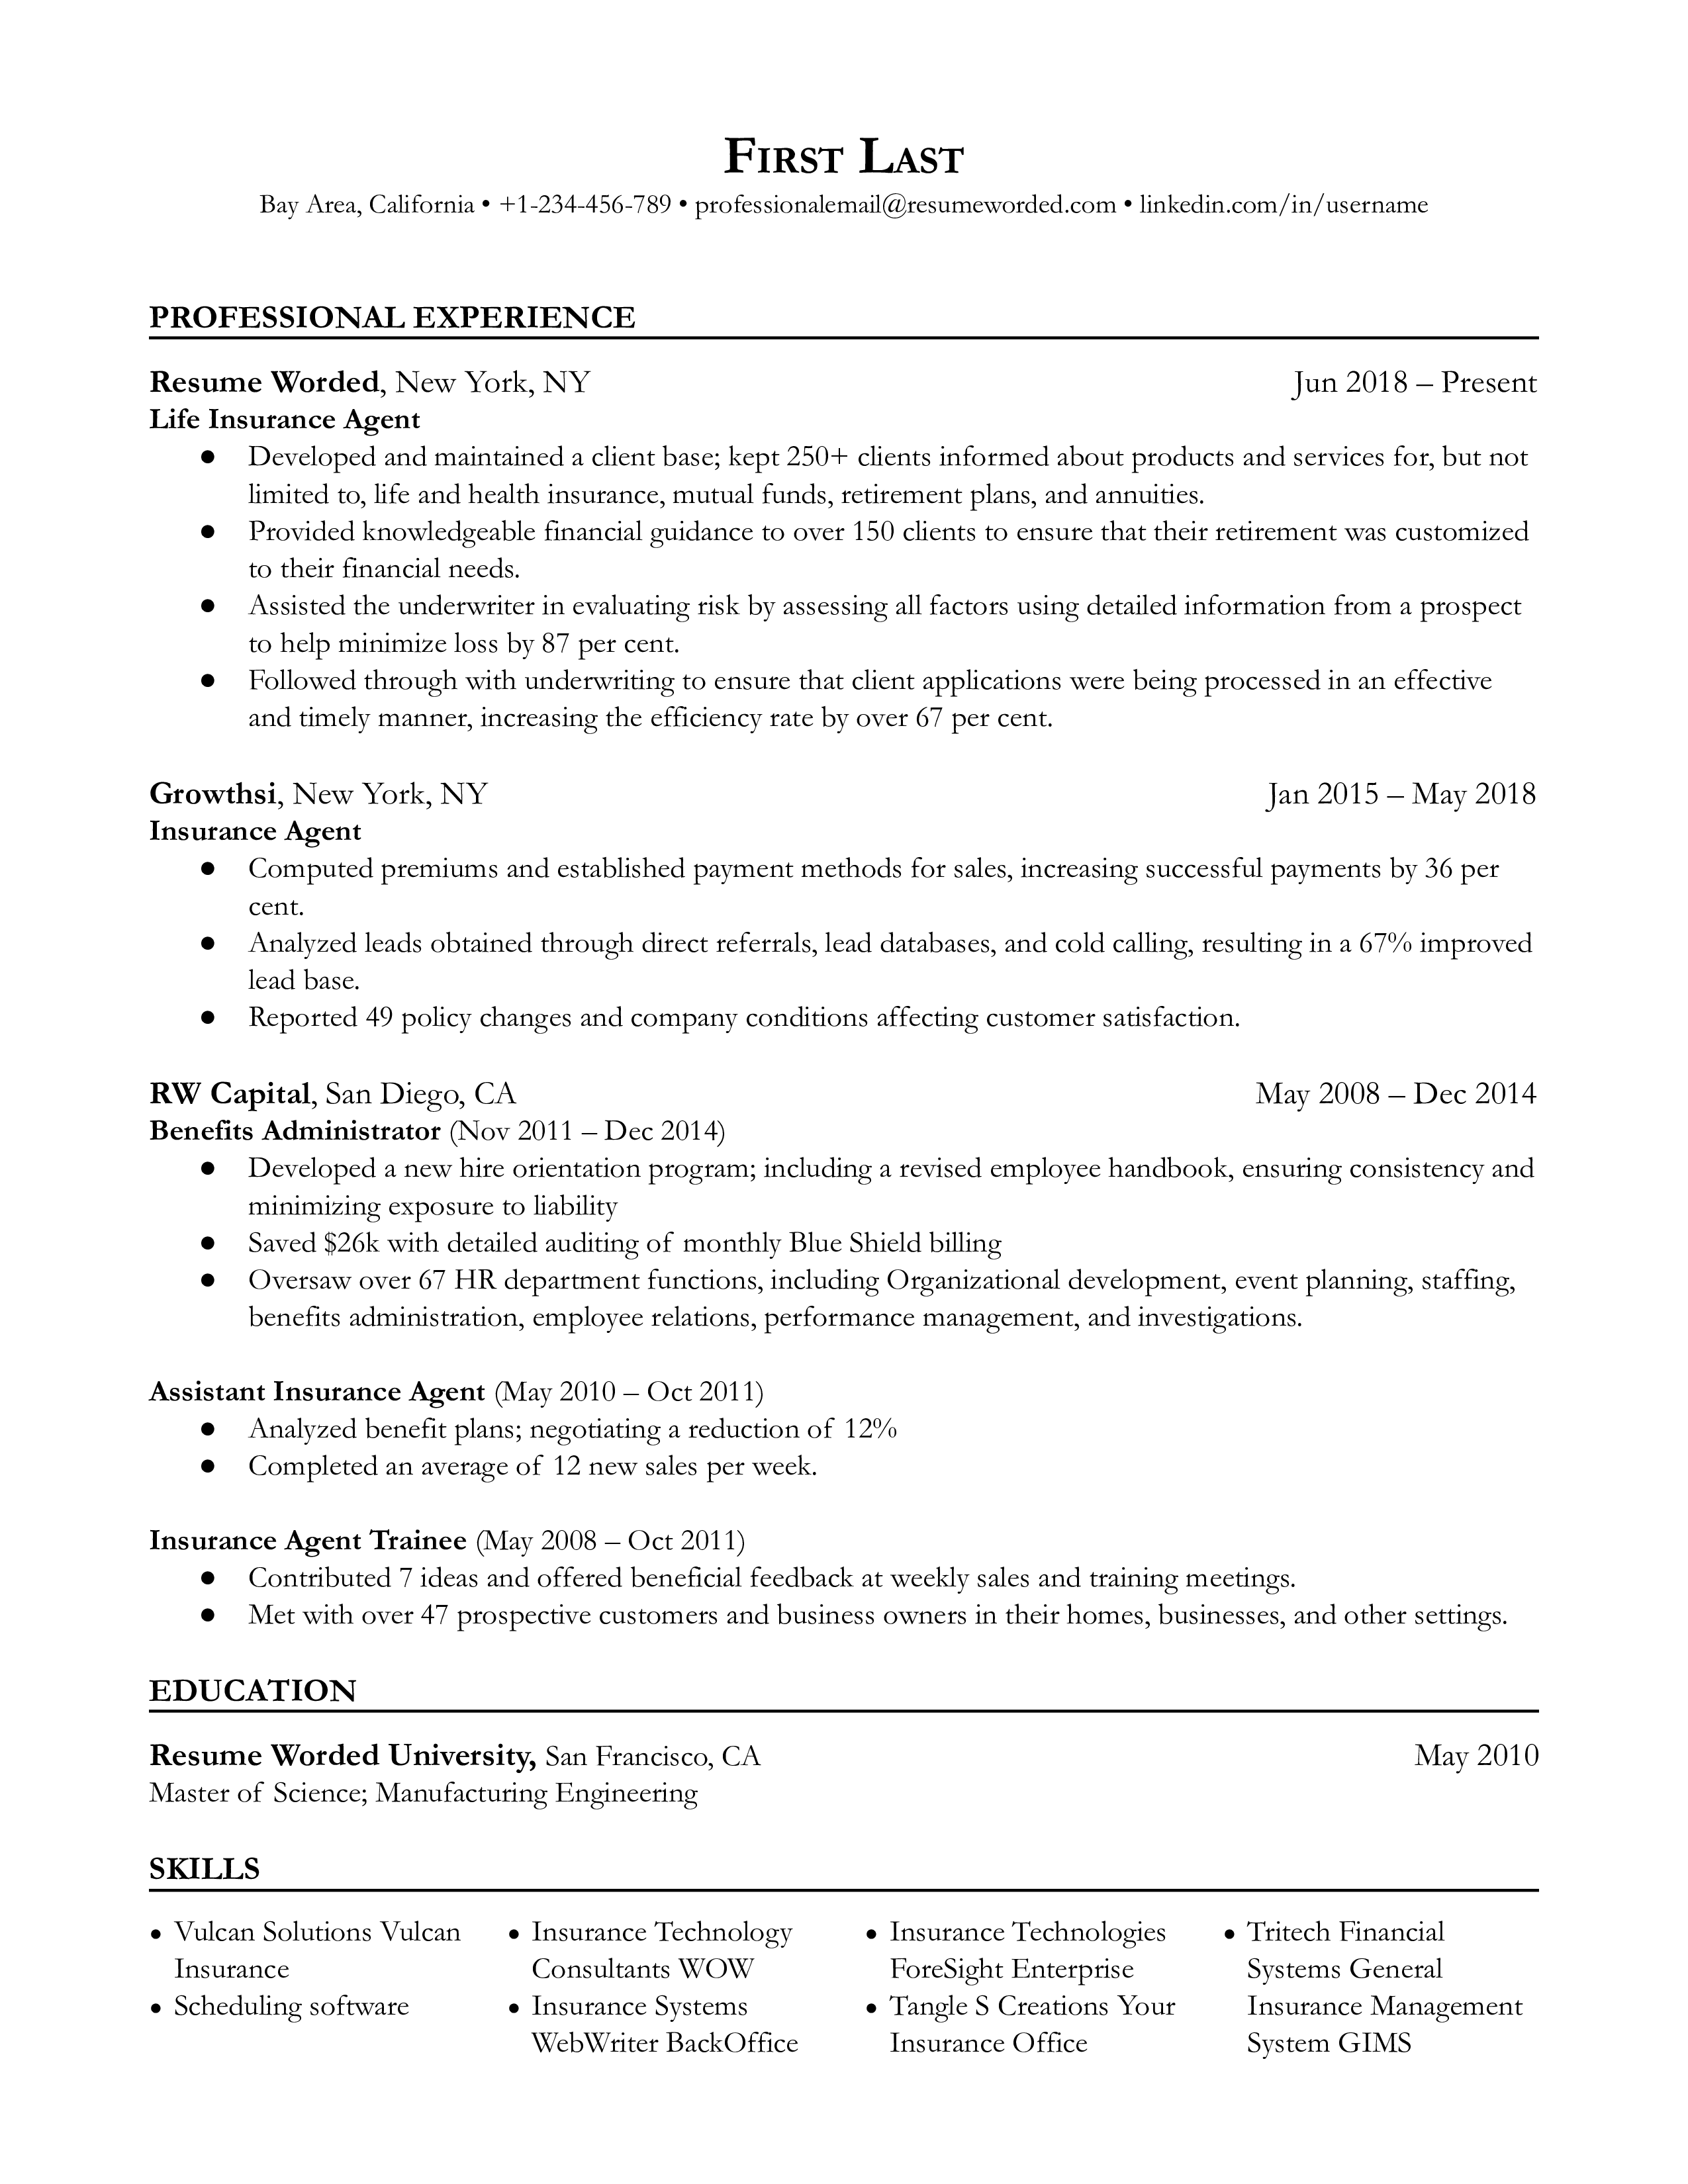 Professional resume of a life insurance agent highlighting digital proficiency and education-focused selling skills.